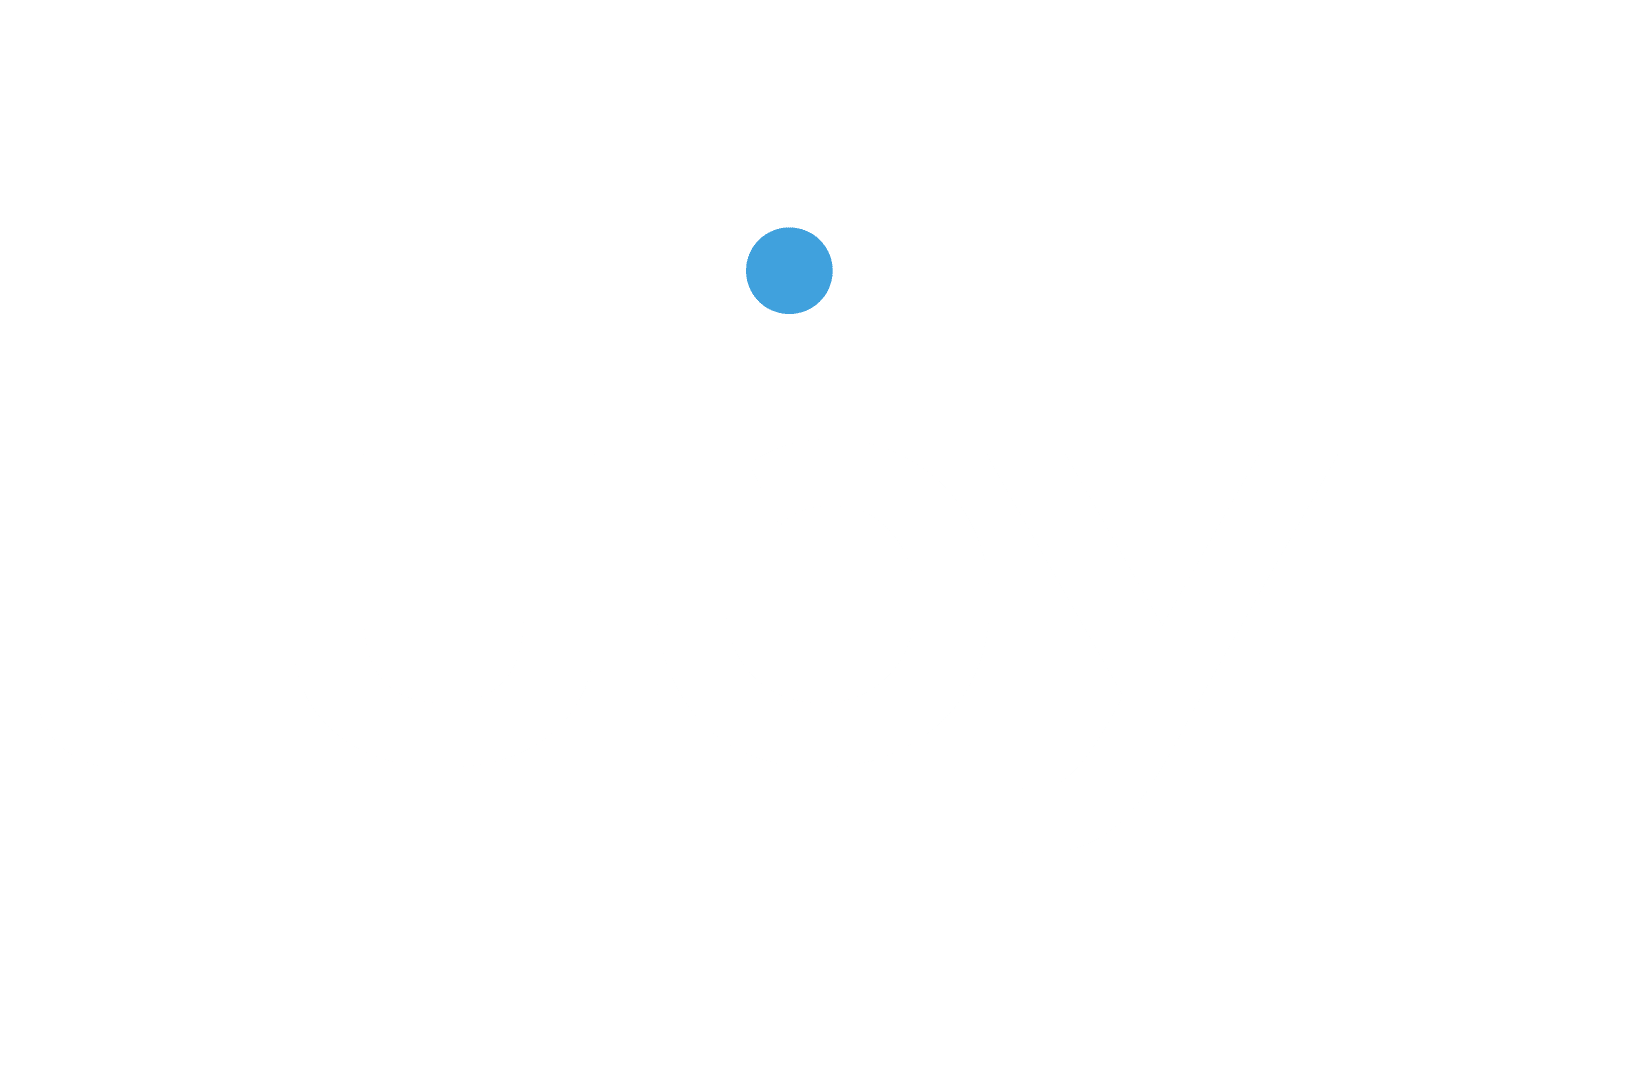 Financial Services Luby Software